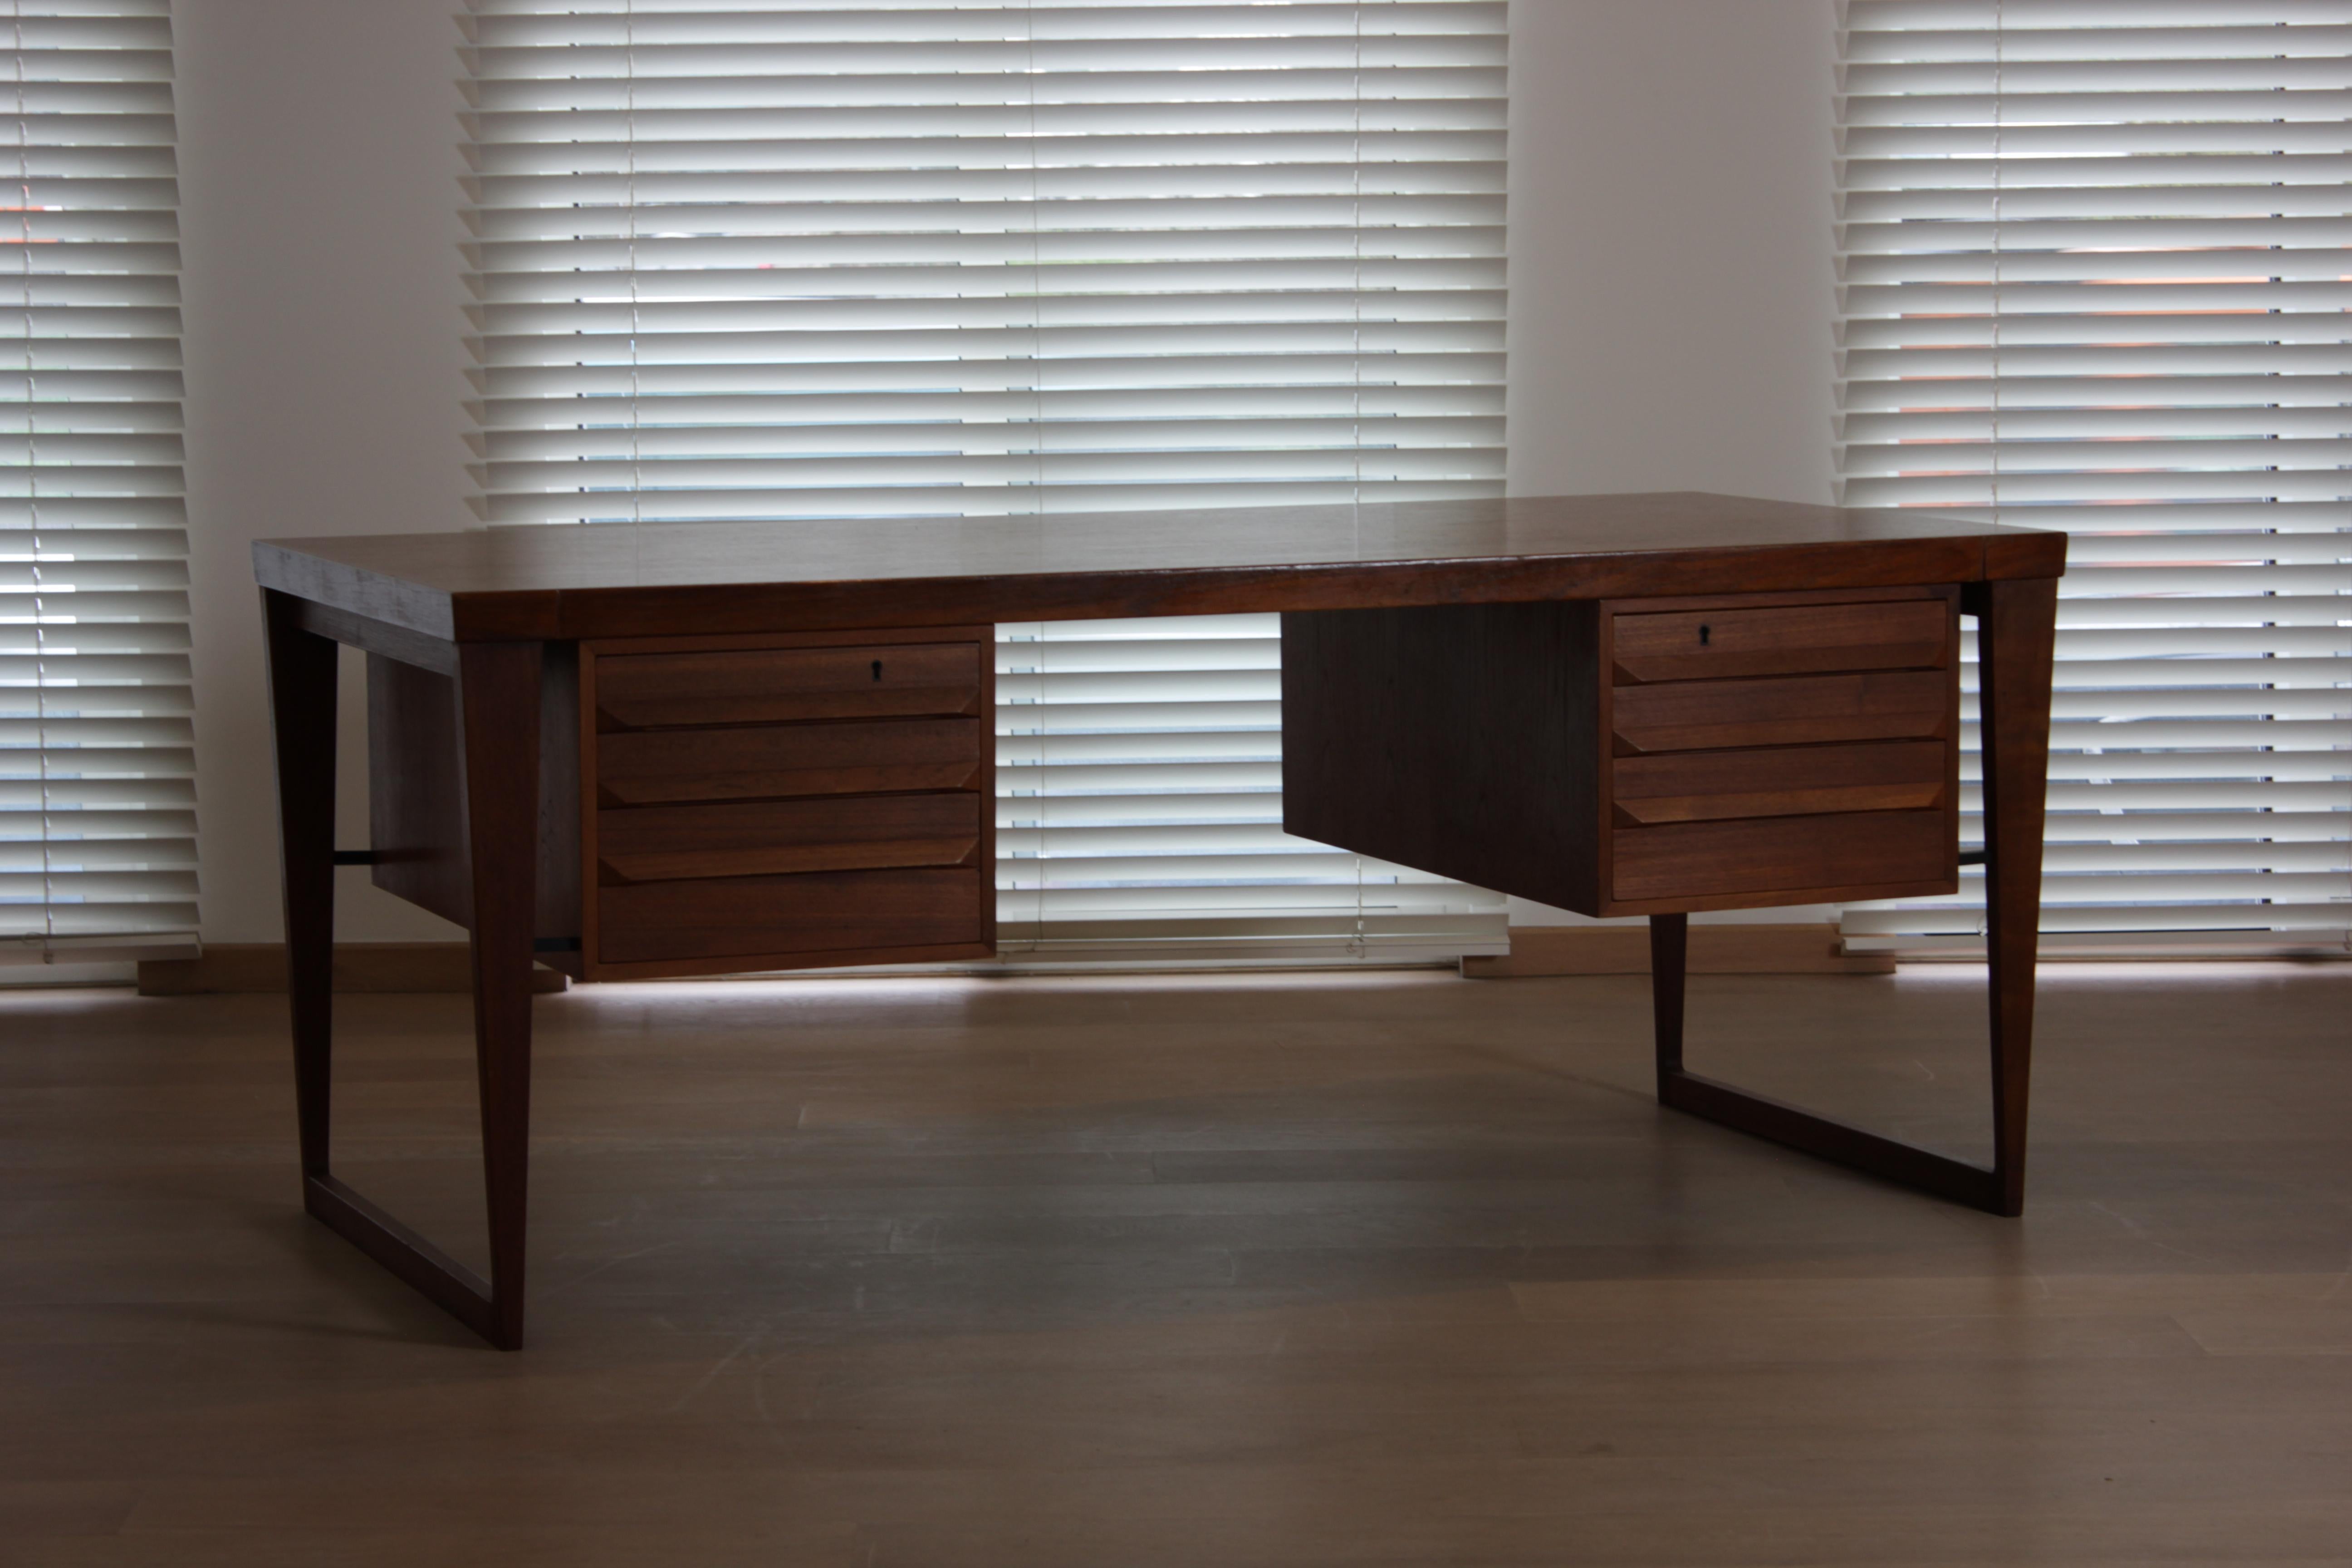 'Model 70'

1950s

Denmark

Teak

72cm high, 172cm wide, 85cm deep

Kai Kristiansen embodies the essence of Danish Modern design, with his creations serving as quintessential examples of Scandinavian style. Throughout his career, he crafted a wide